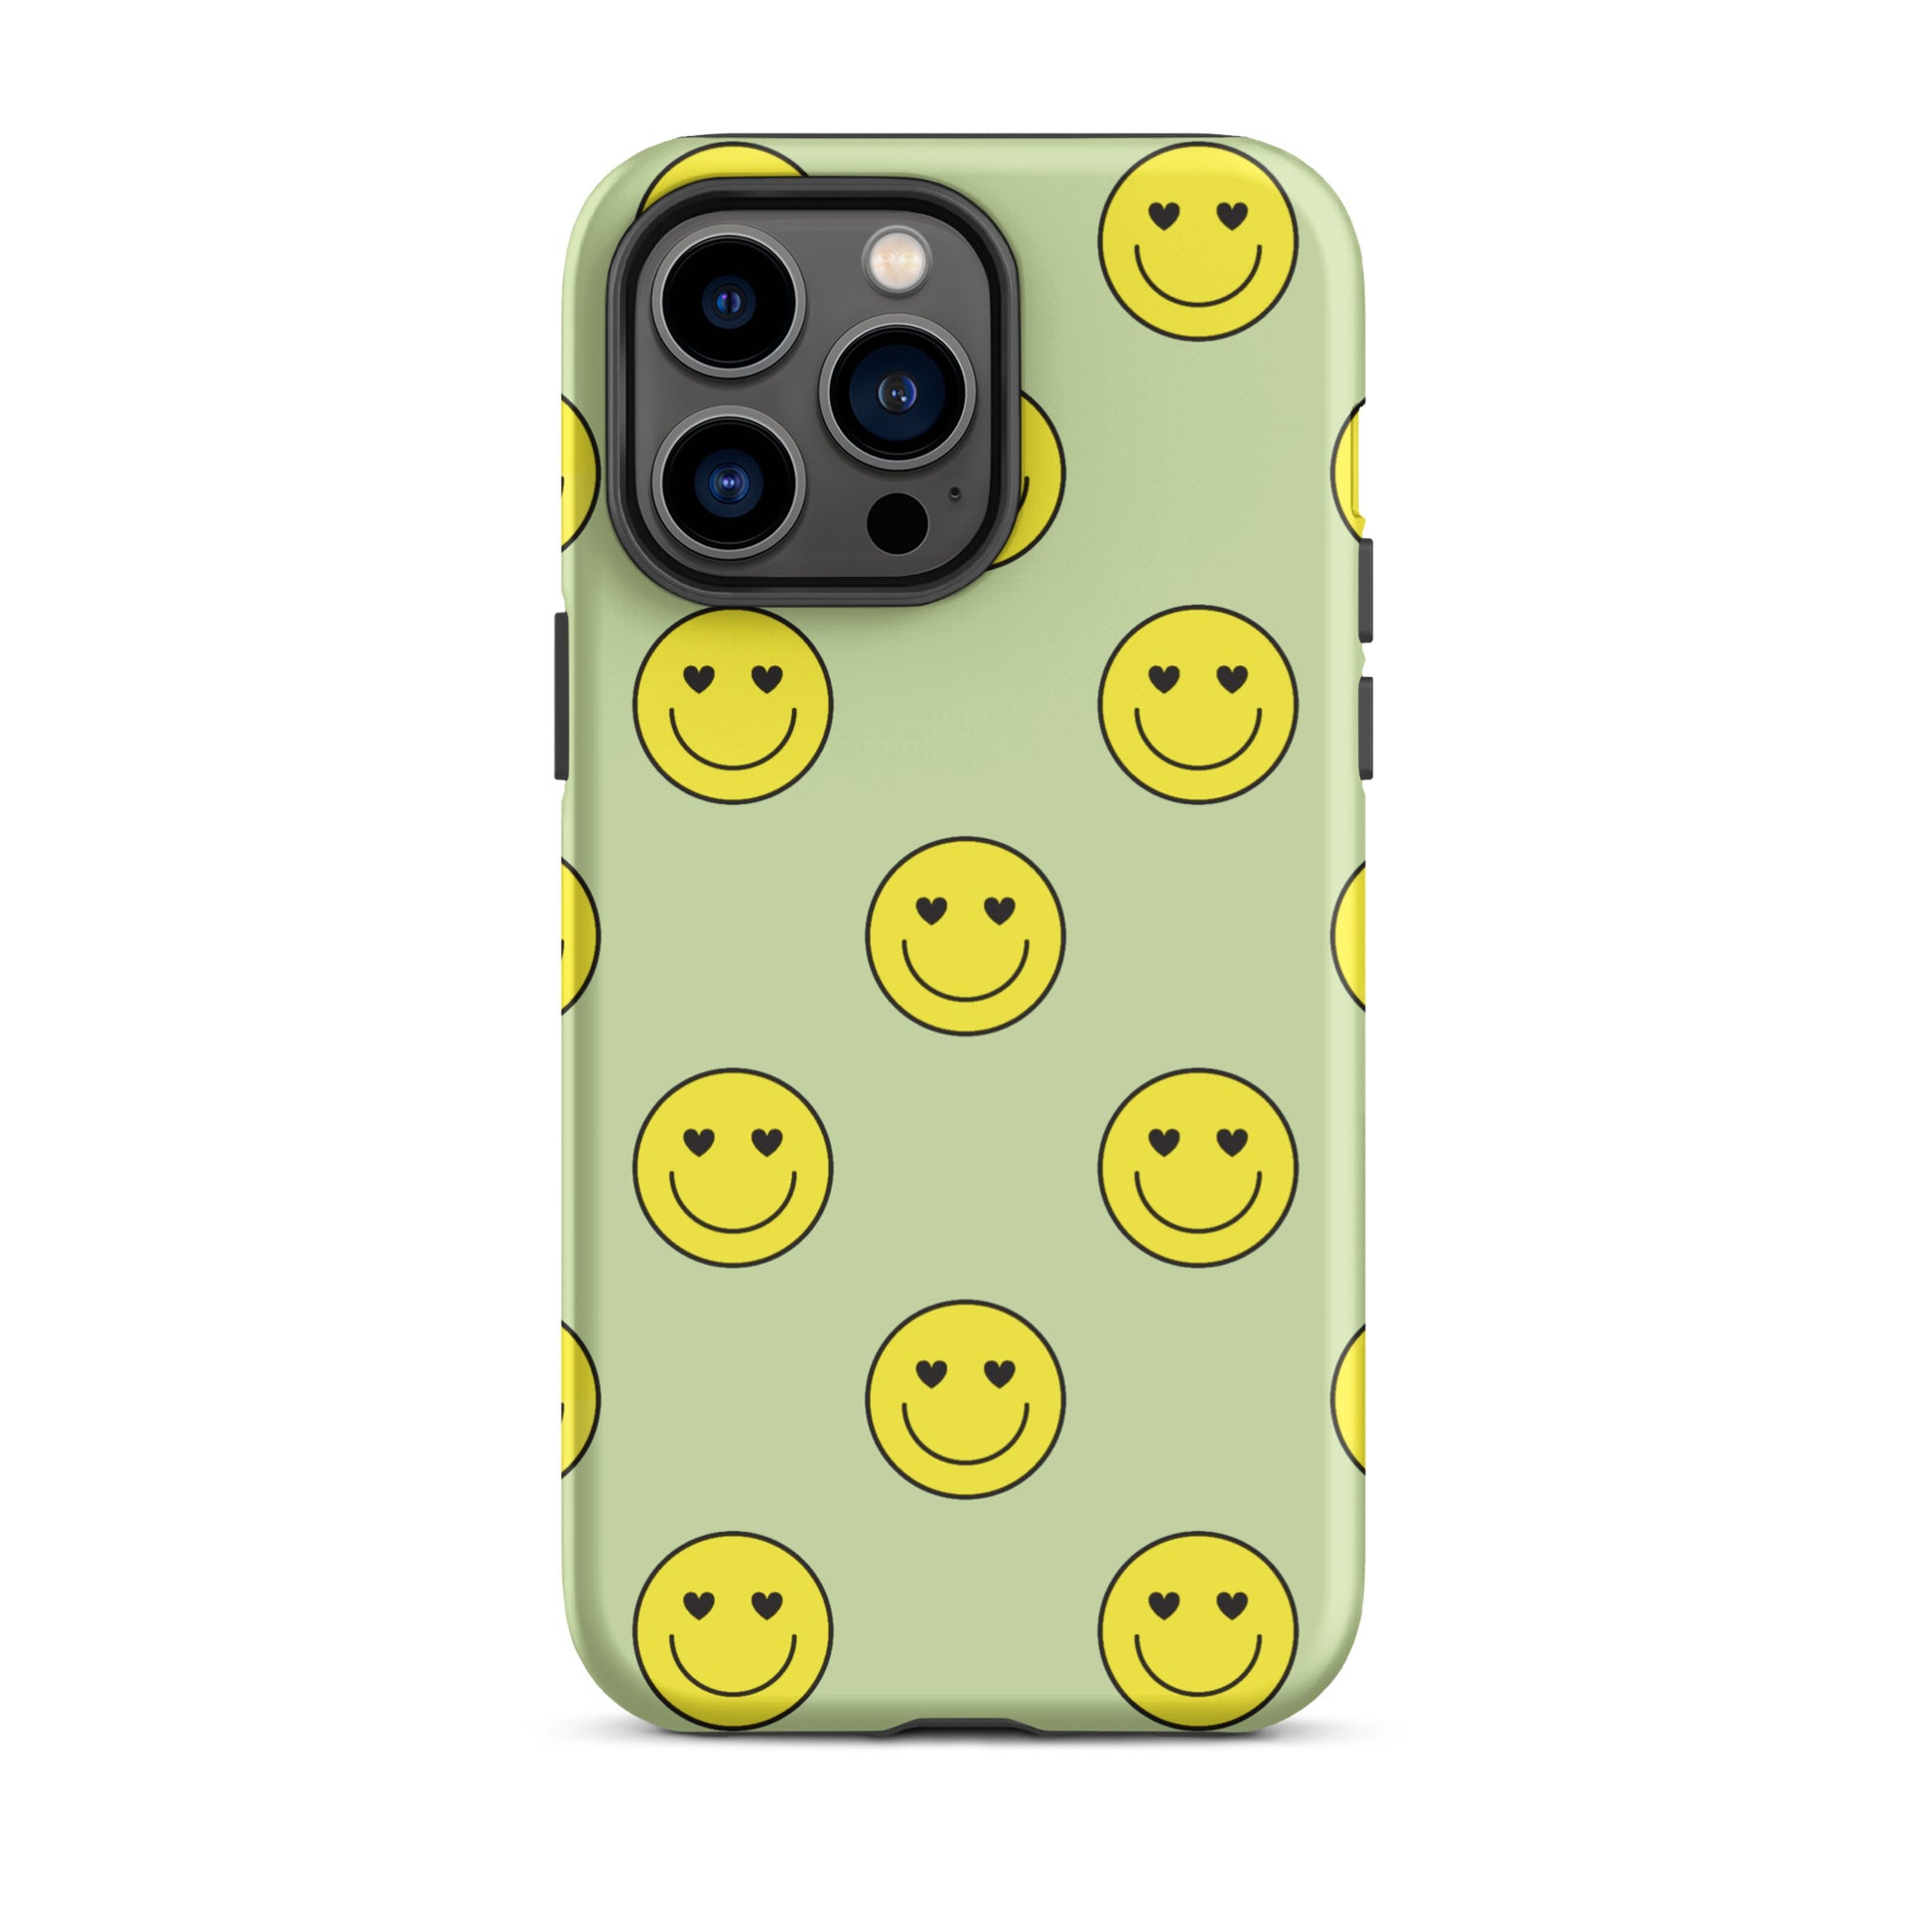 Neon Smiley Faces iPhone Case iPhone 14 Pro Max Matte